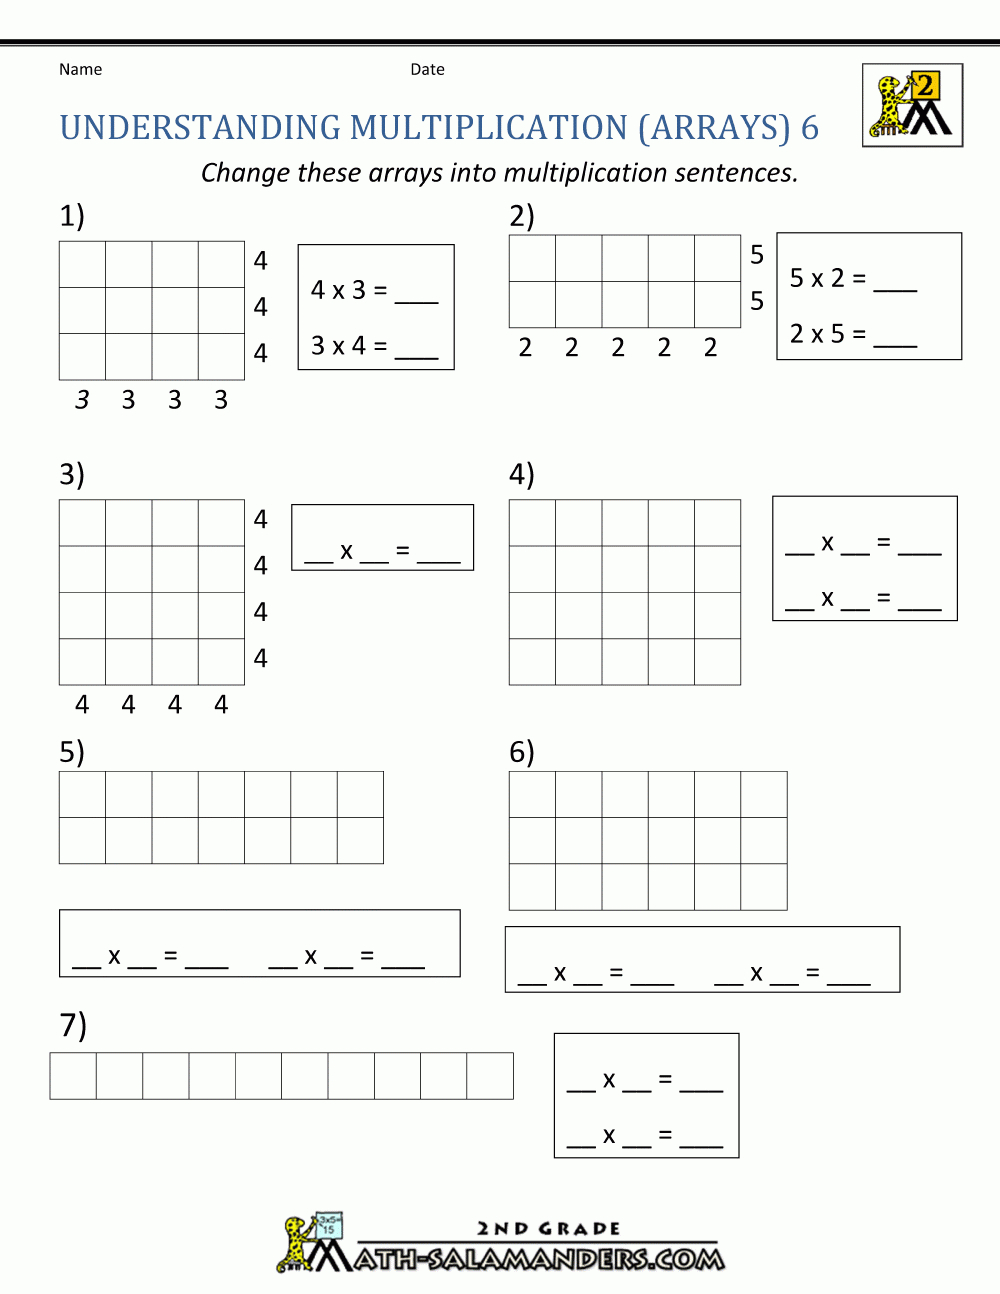 Beginning Multiplication Worksheets with Worksheets Multiplication Using Arrays